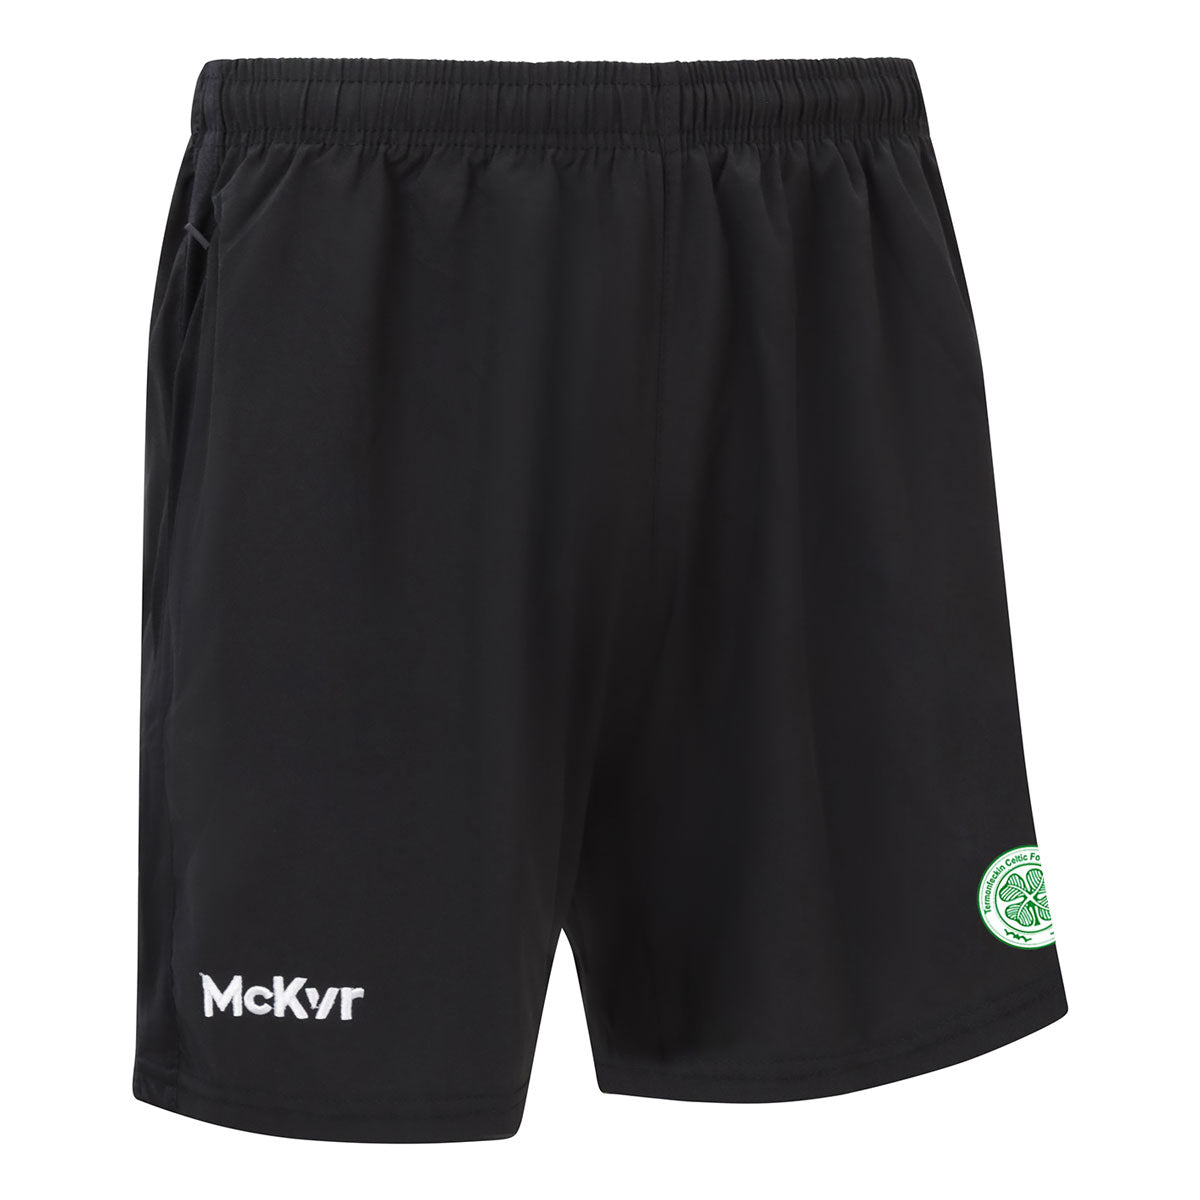 Mc Keever Termonfeckin Celtic FC Core 22 Leisure Shorts - Youth - Black